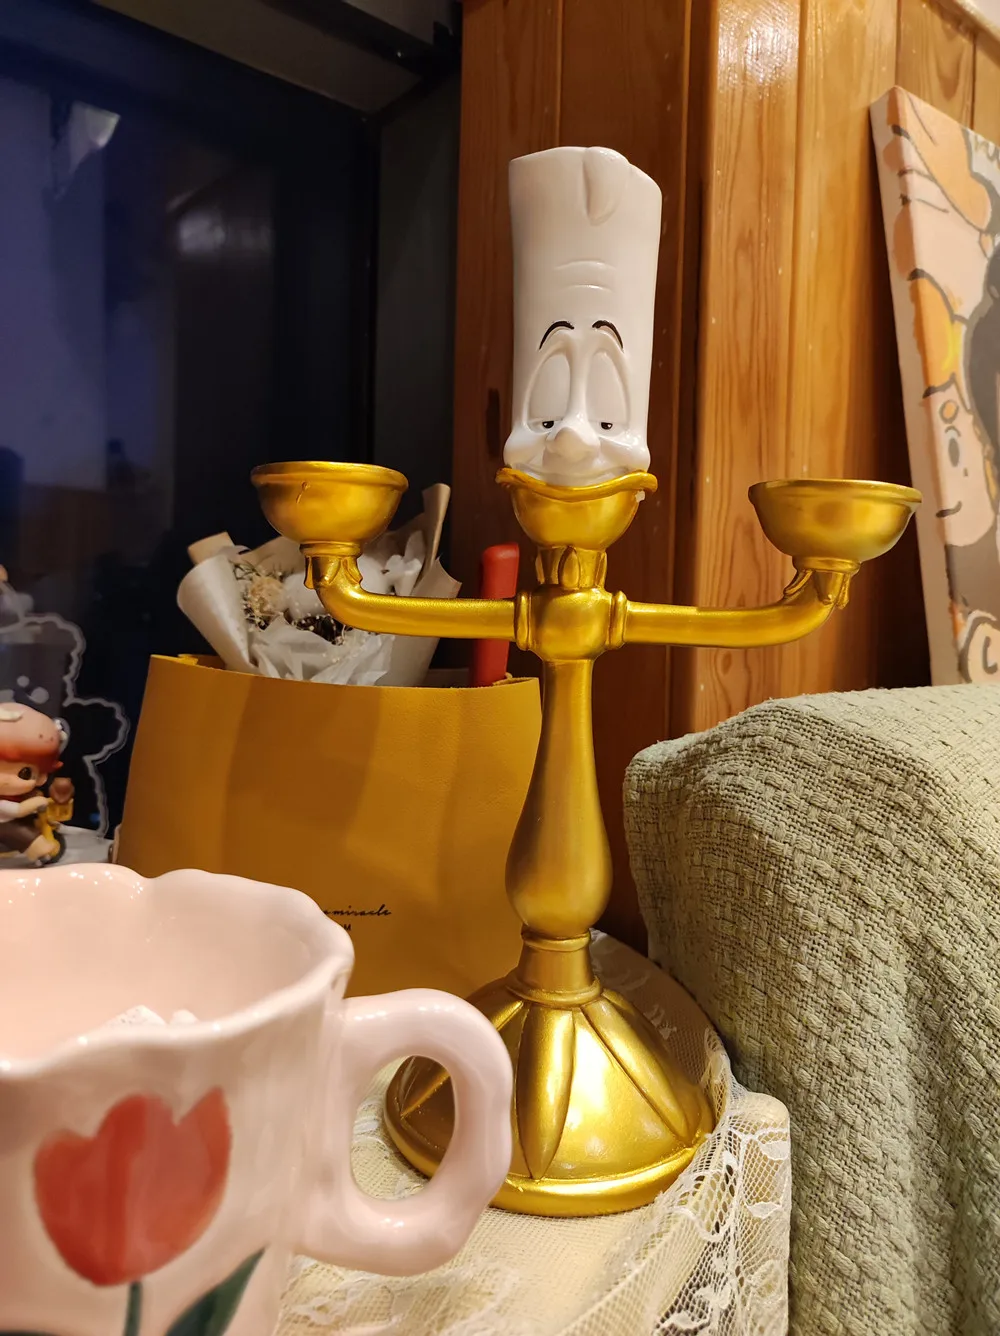 Disney Cogsworth and Lumiere Mug Set - Beauty and the Beast